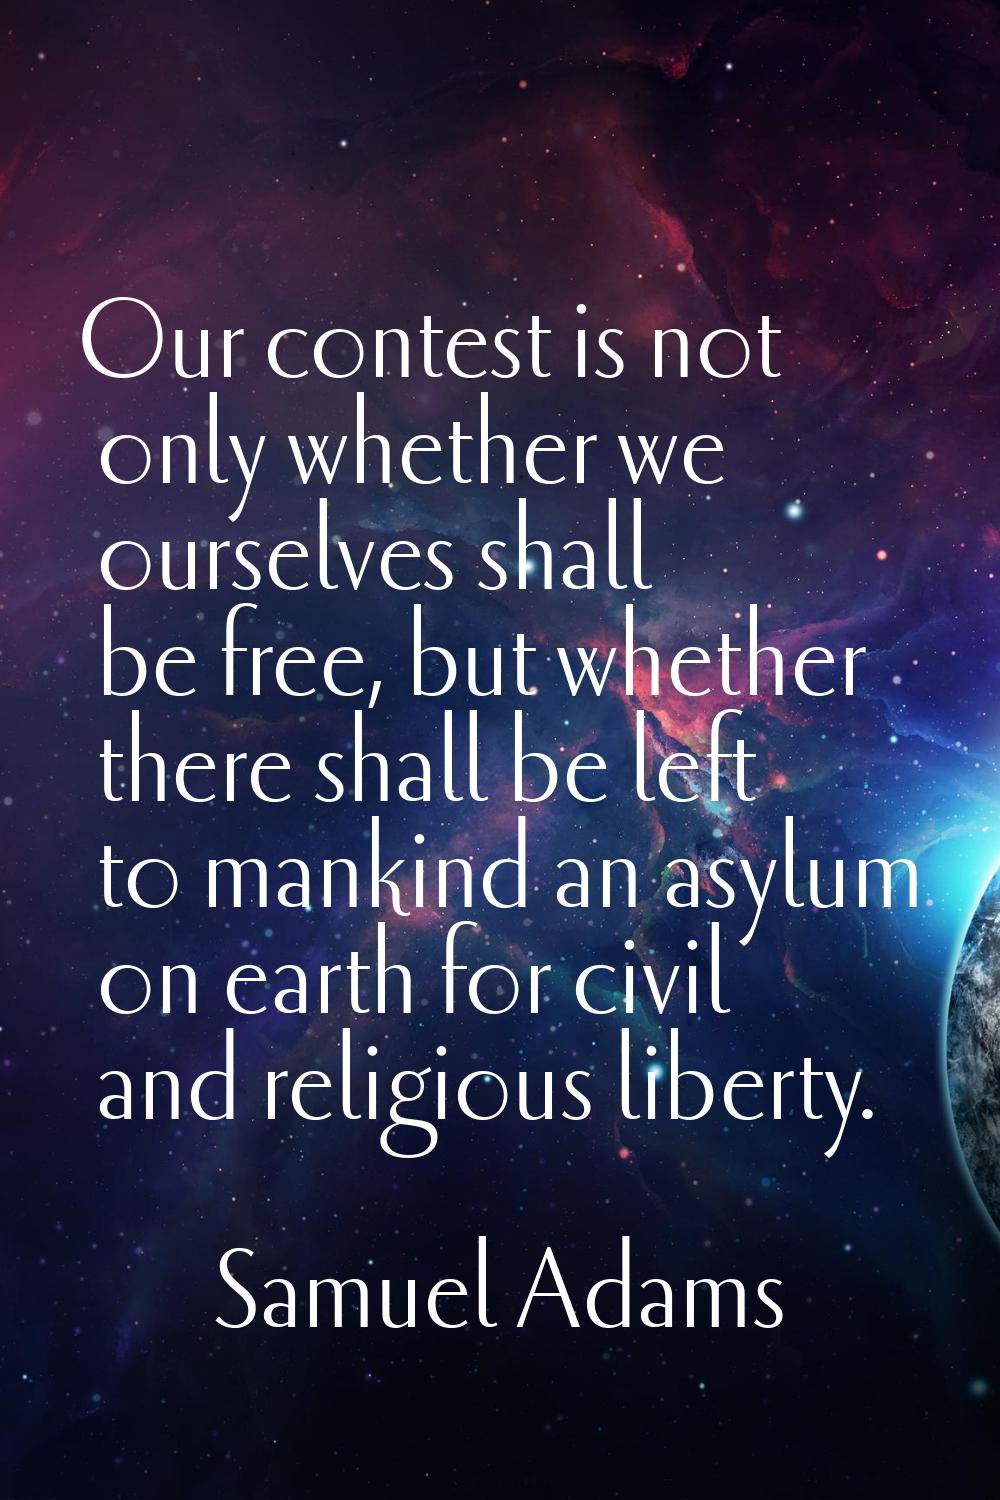 Our contest is not only whether we ourselves shall be free, but whether there shall be left to mank